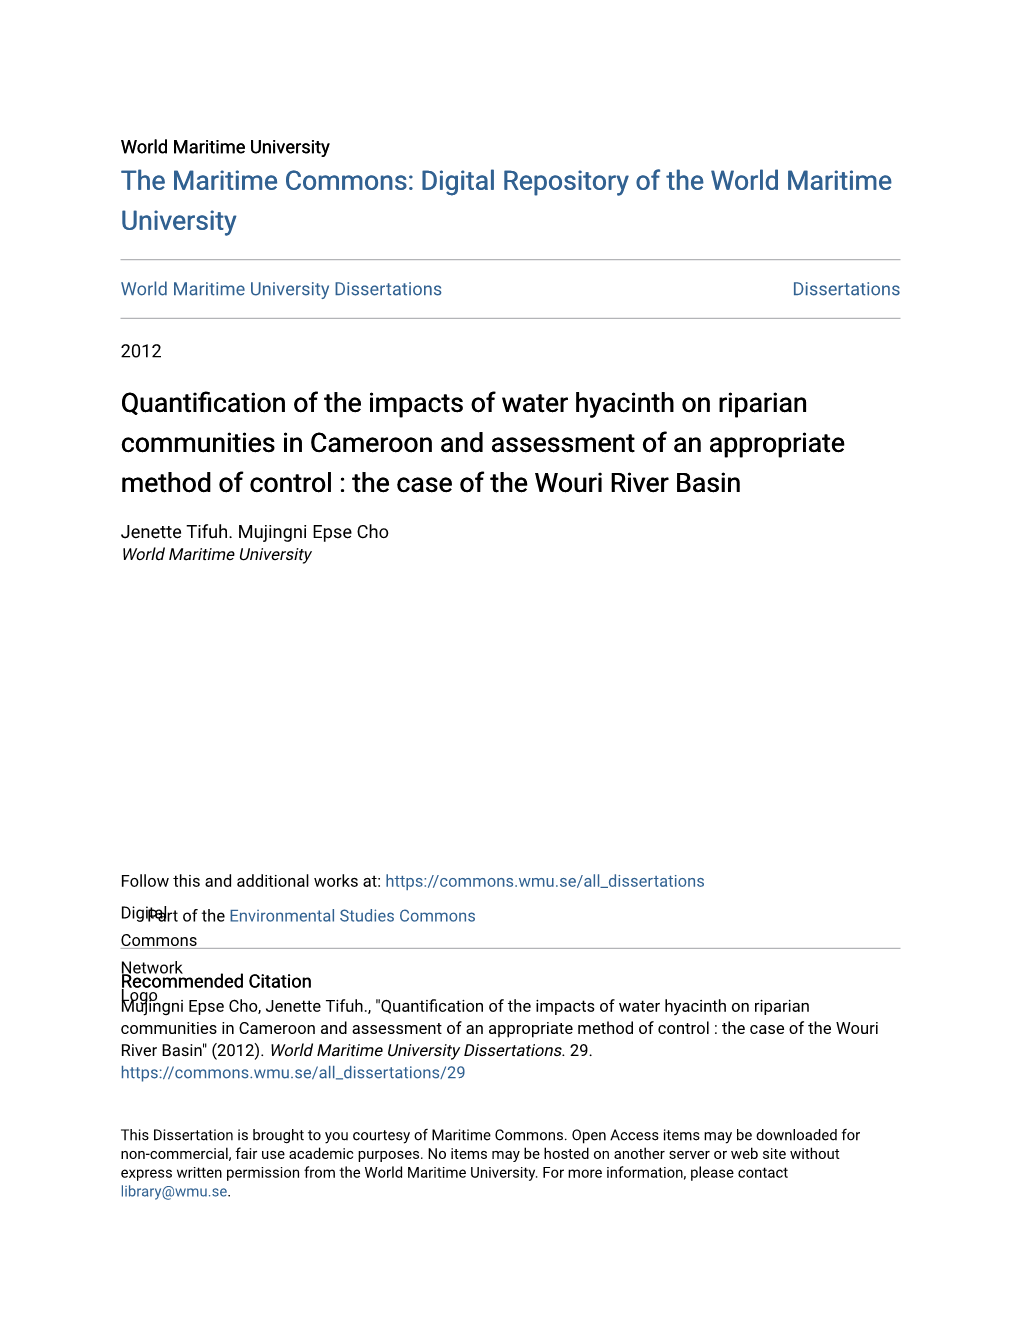 Quantification of the Impacts of Water Hyacinth on Riparian Communities in Cameroon and Assessment of an Appropriate Method of C